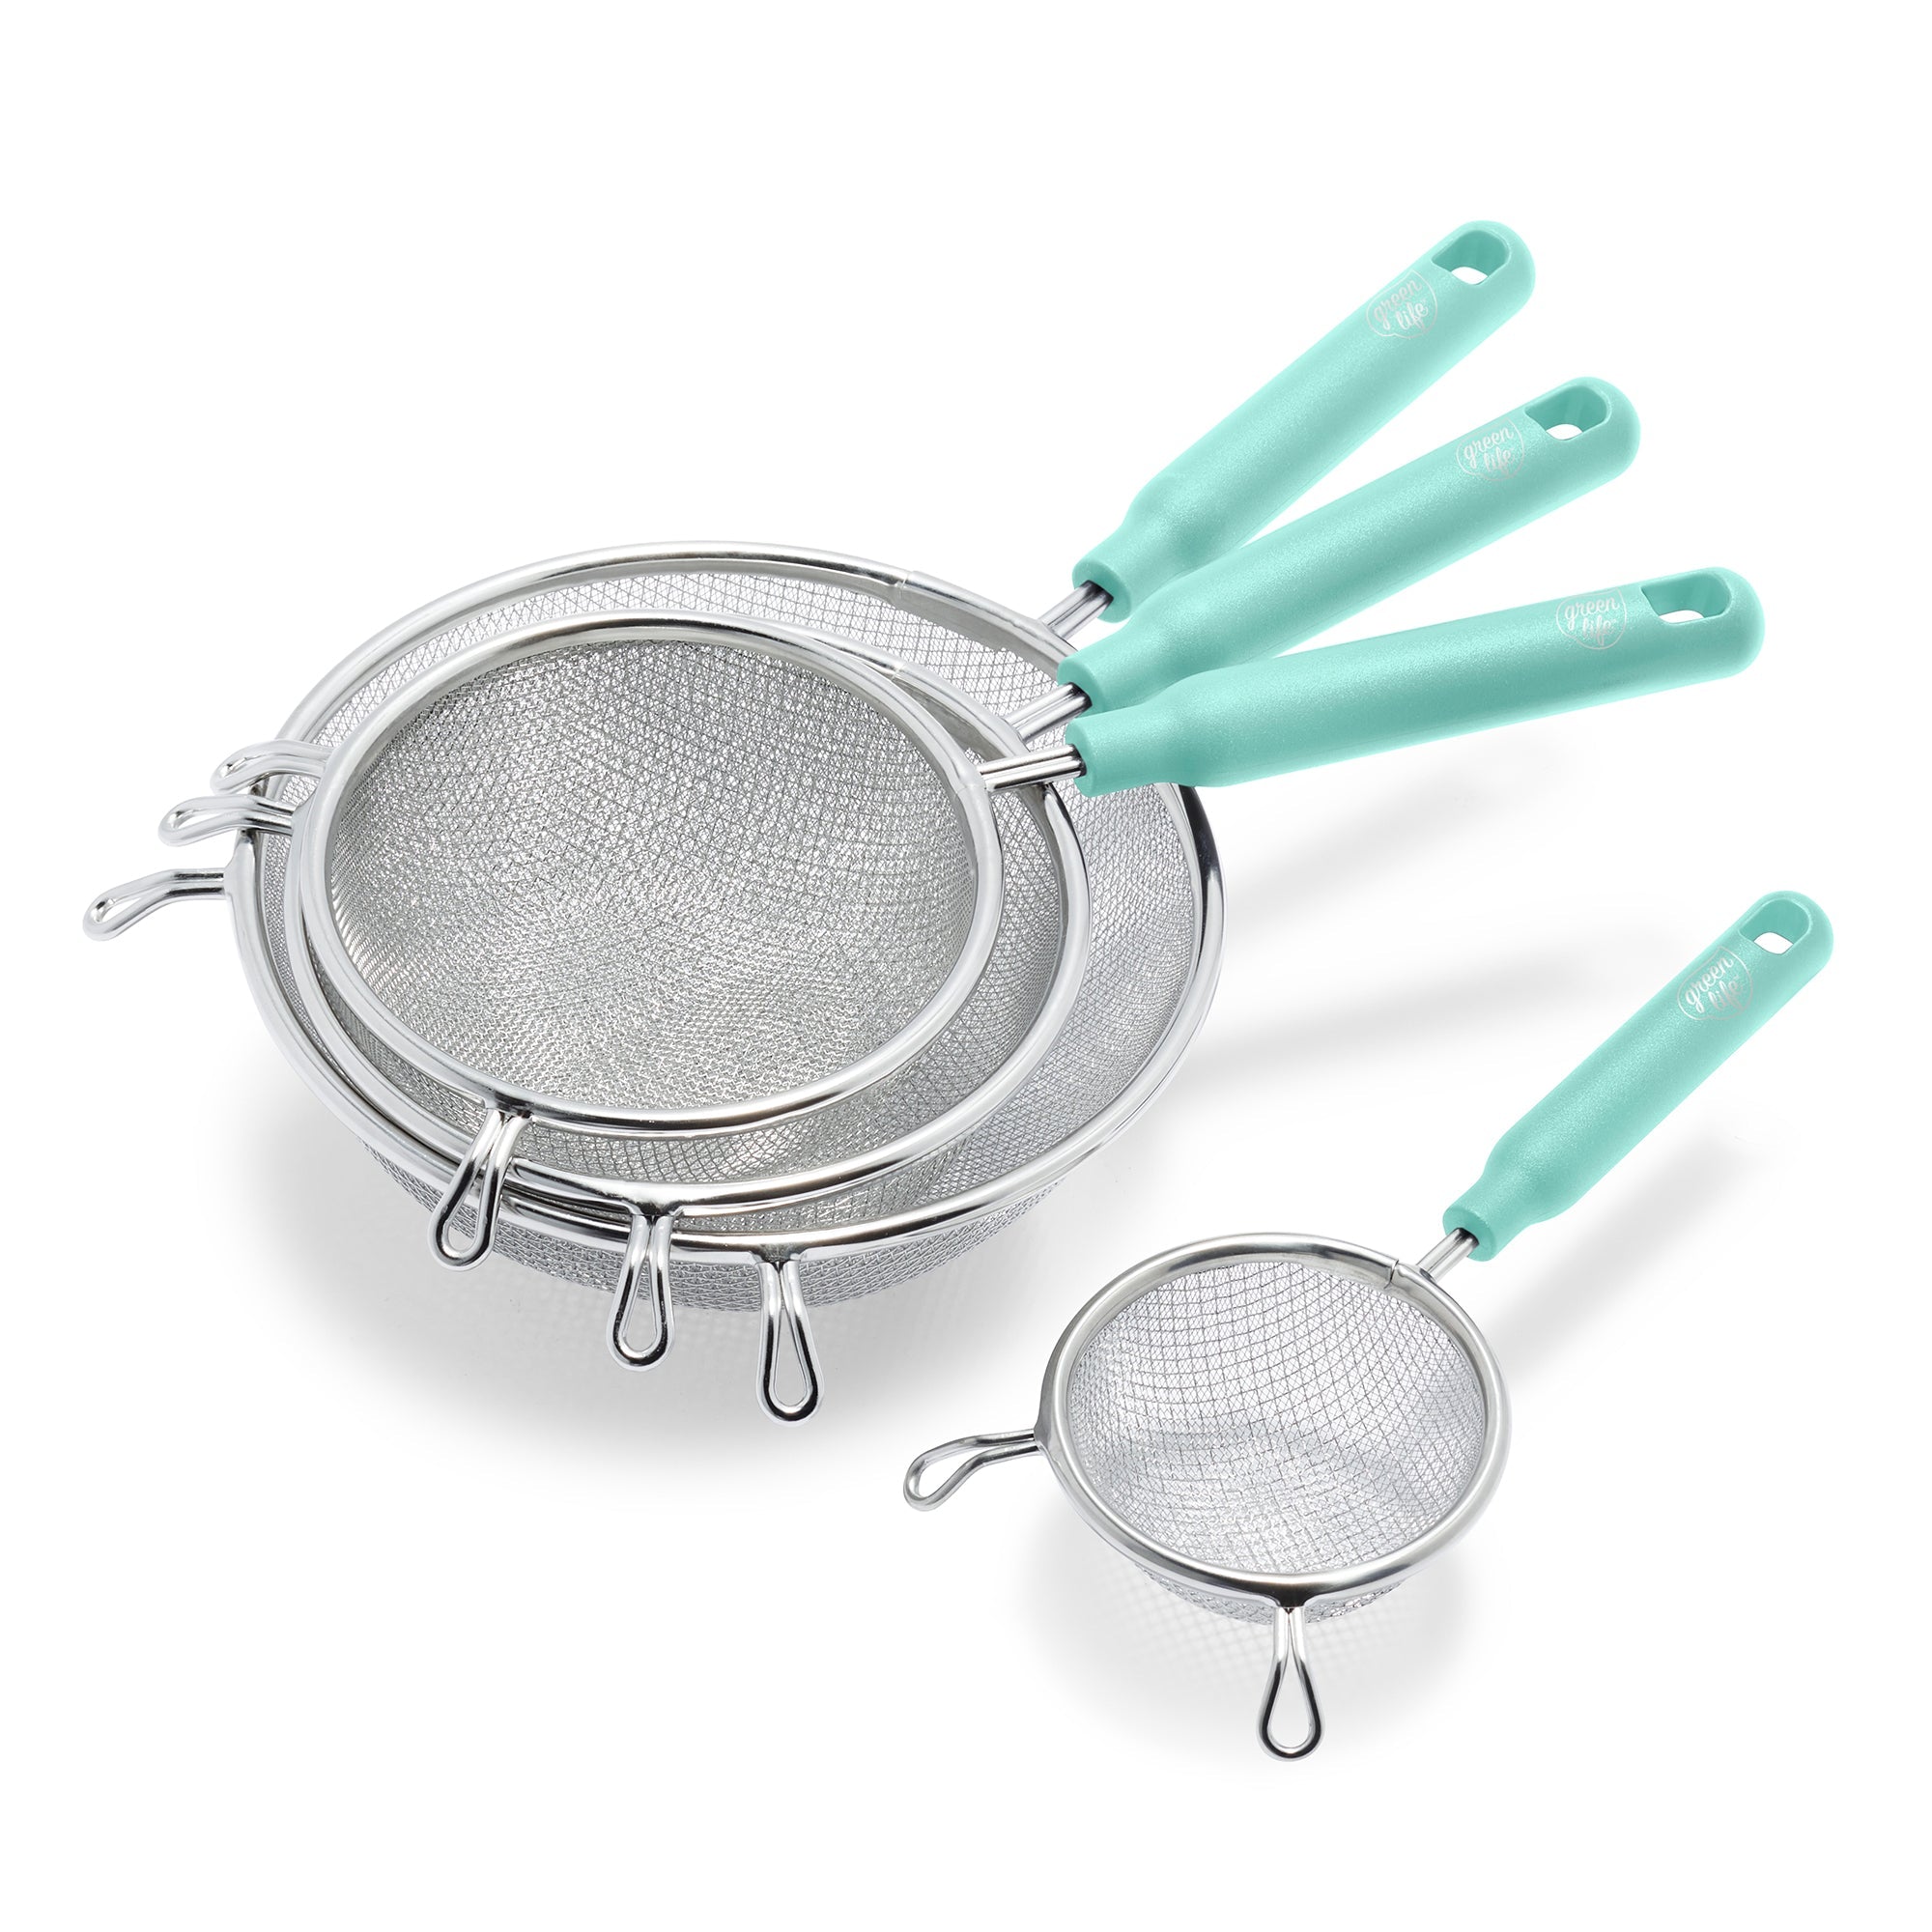 GreenLife Stainless Steel 5 Piece Cutlery Set, Turquoise